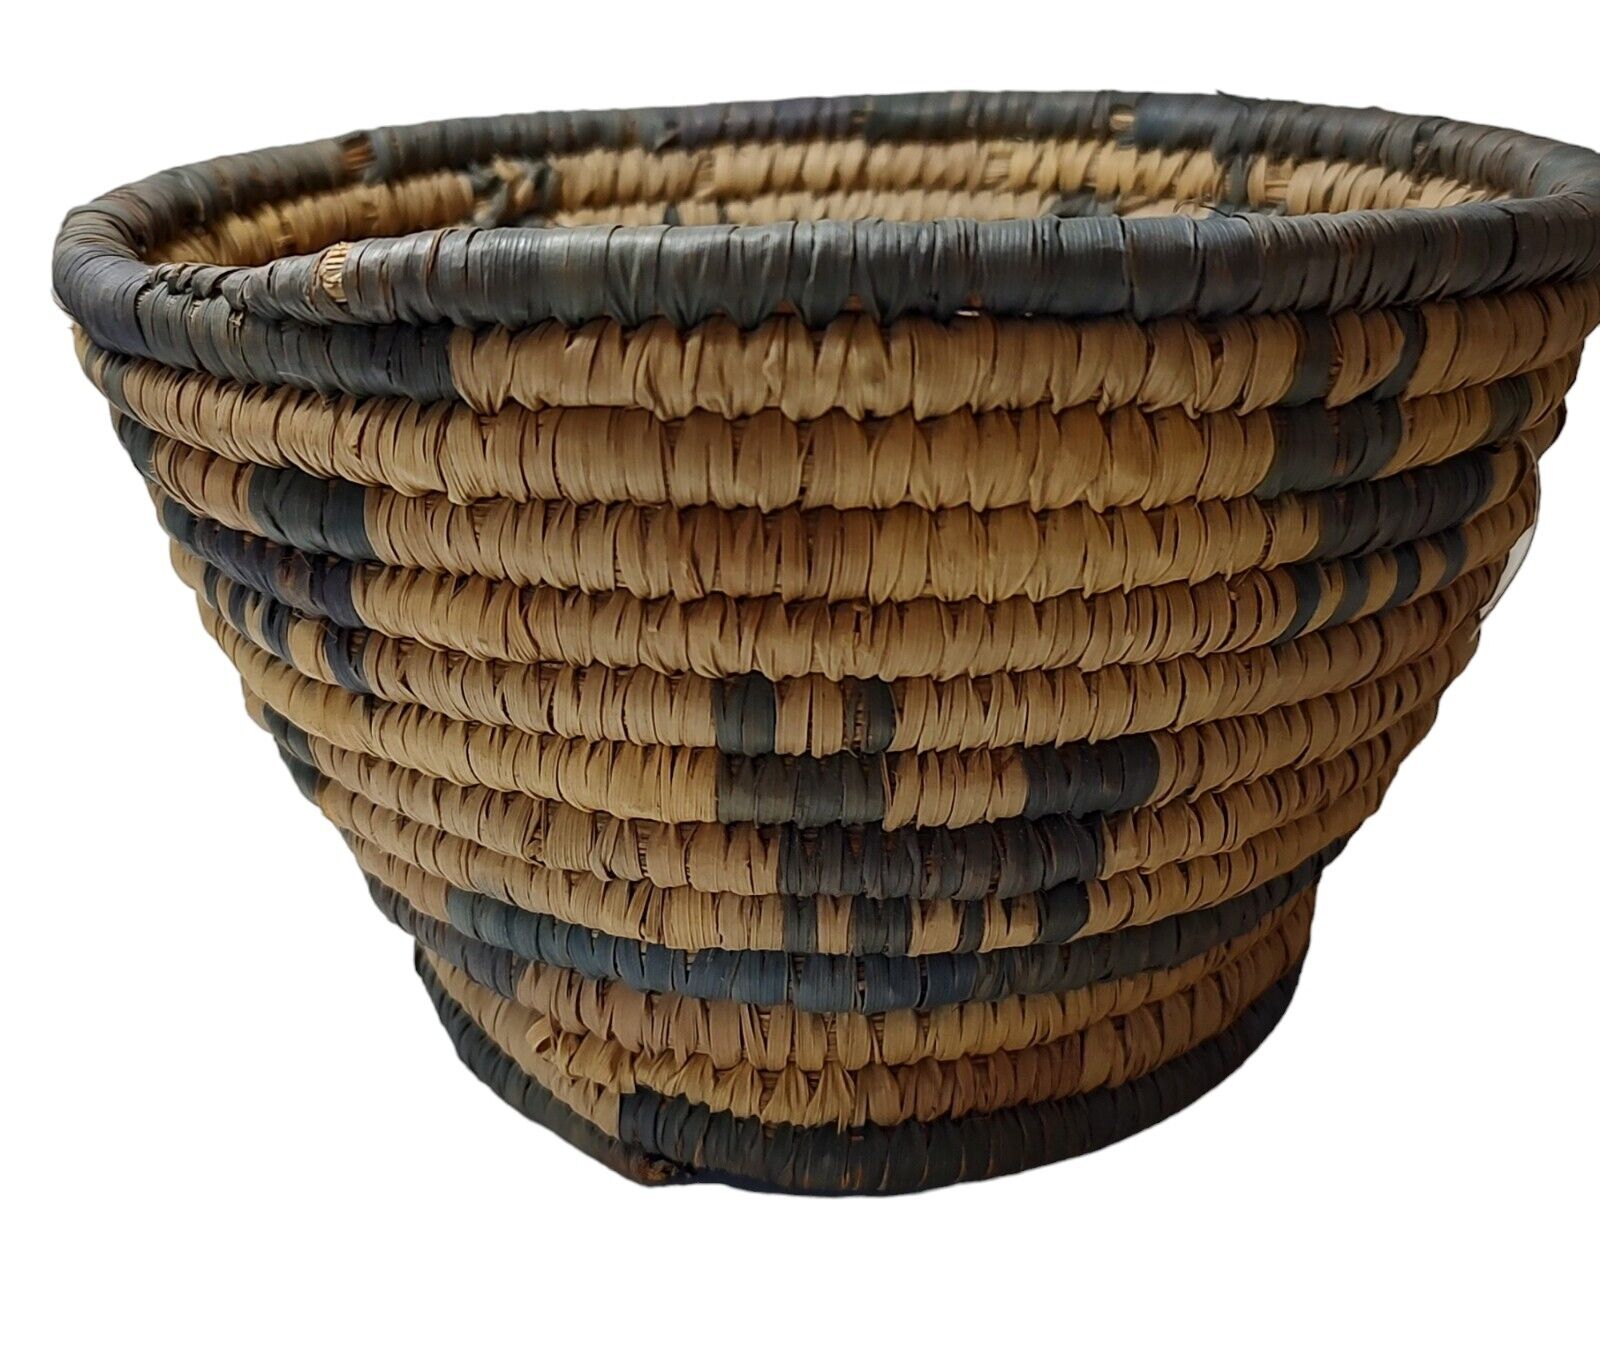 Contemporary Zula Tribe South Africa Straw Woven Coil Bowl Basket Tight Weave 